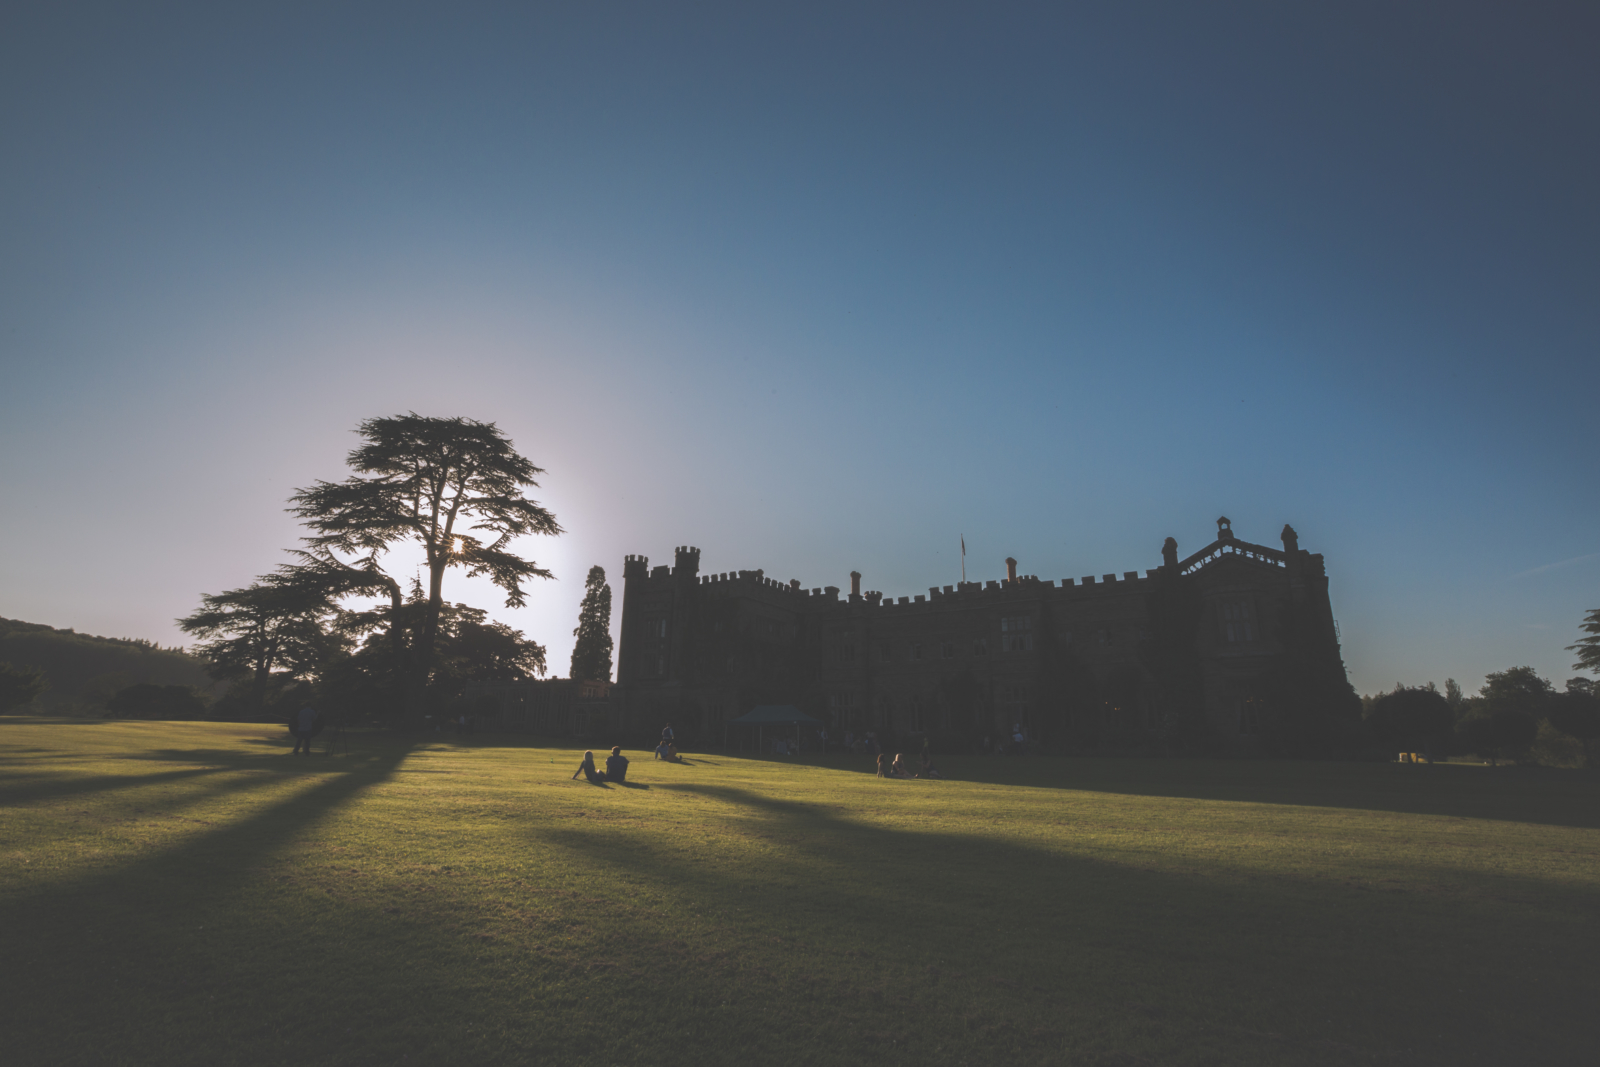 The sun sets over a castle, people sitting on the lawn in the forefround.